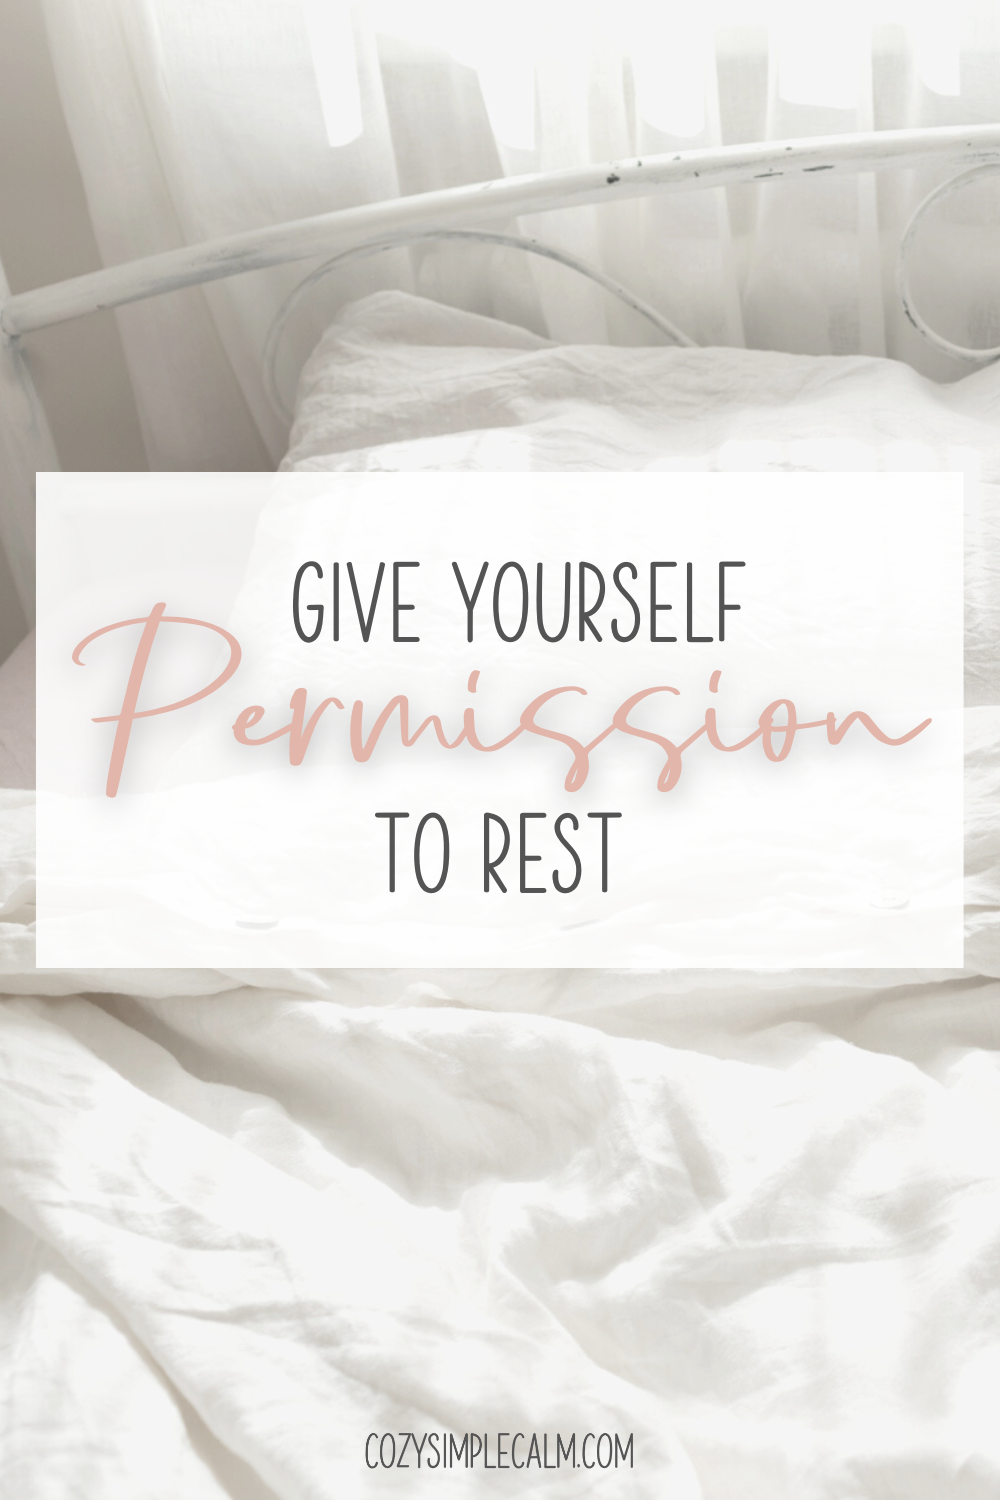 Image of bed with white blankets and white sunlit curtain behind - Text overlay: Give yourself permission to rest - cozysimplecalm.com